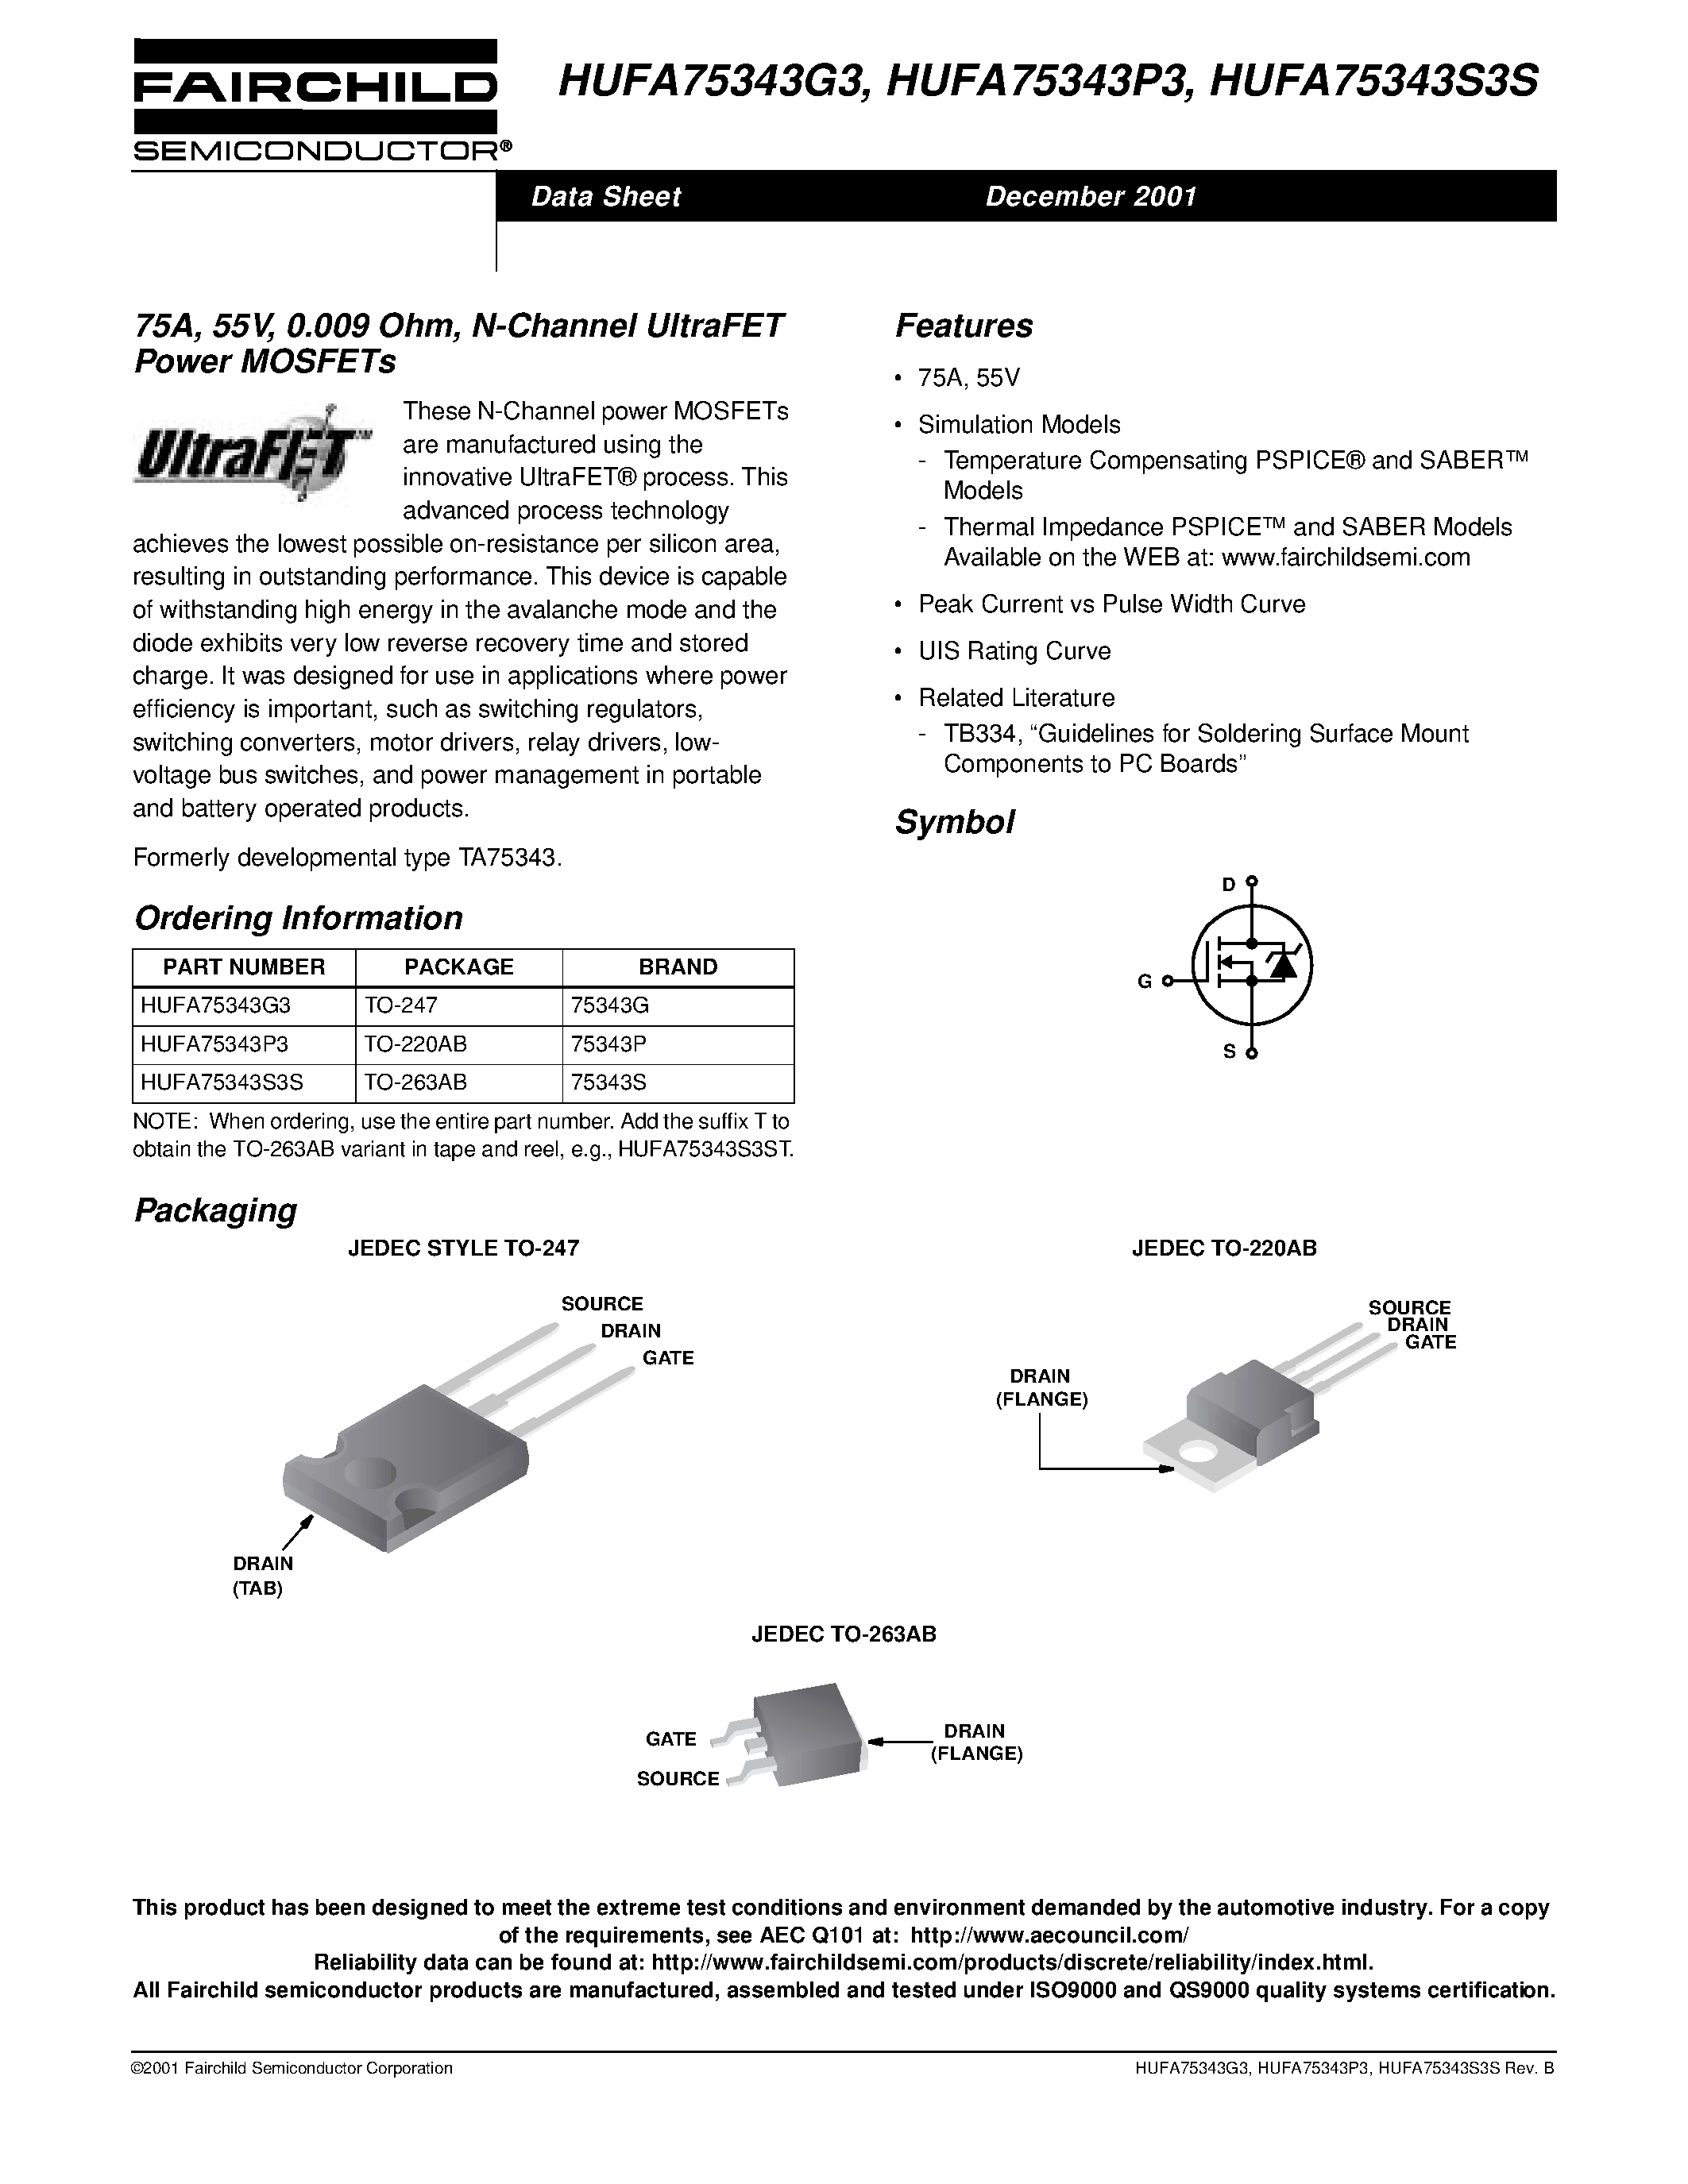 Datasheet HUFA75343S3S - 75A/ 55V/ 0.009 Ohm/ N-Channel UltraFET Power MOSFETs page 1